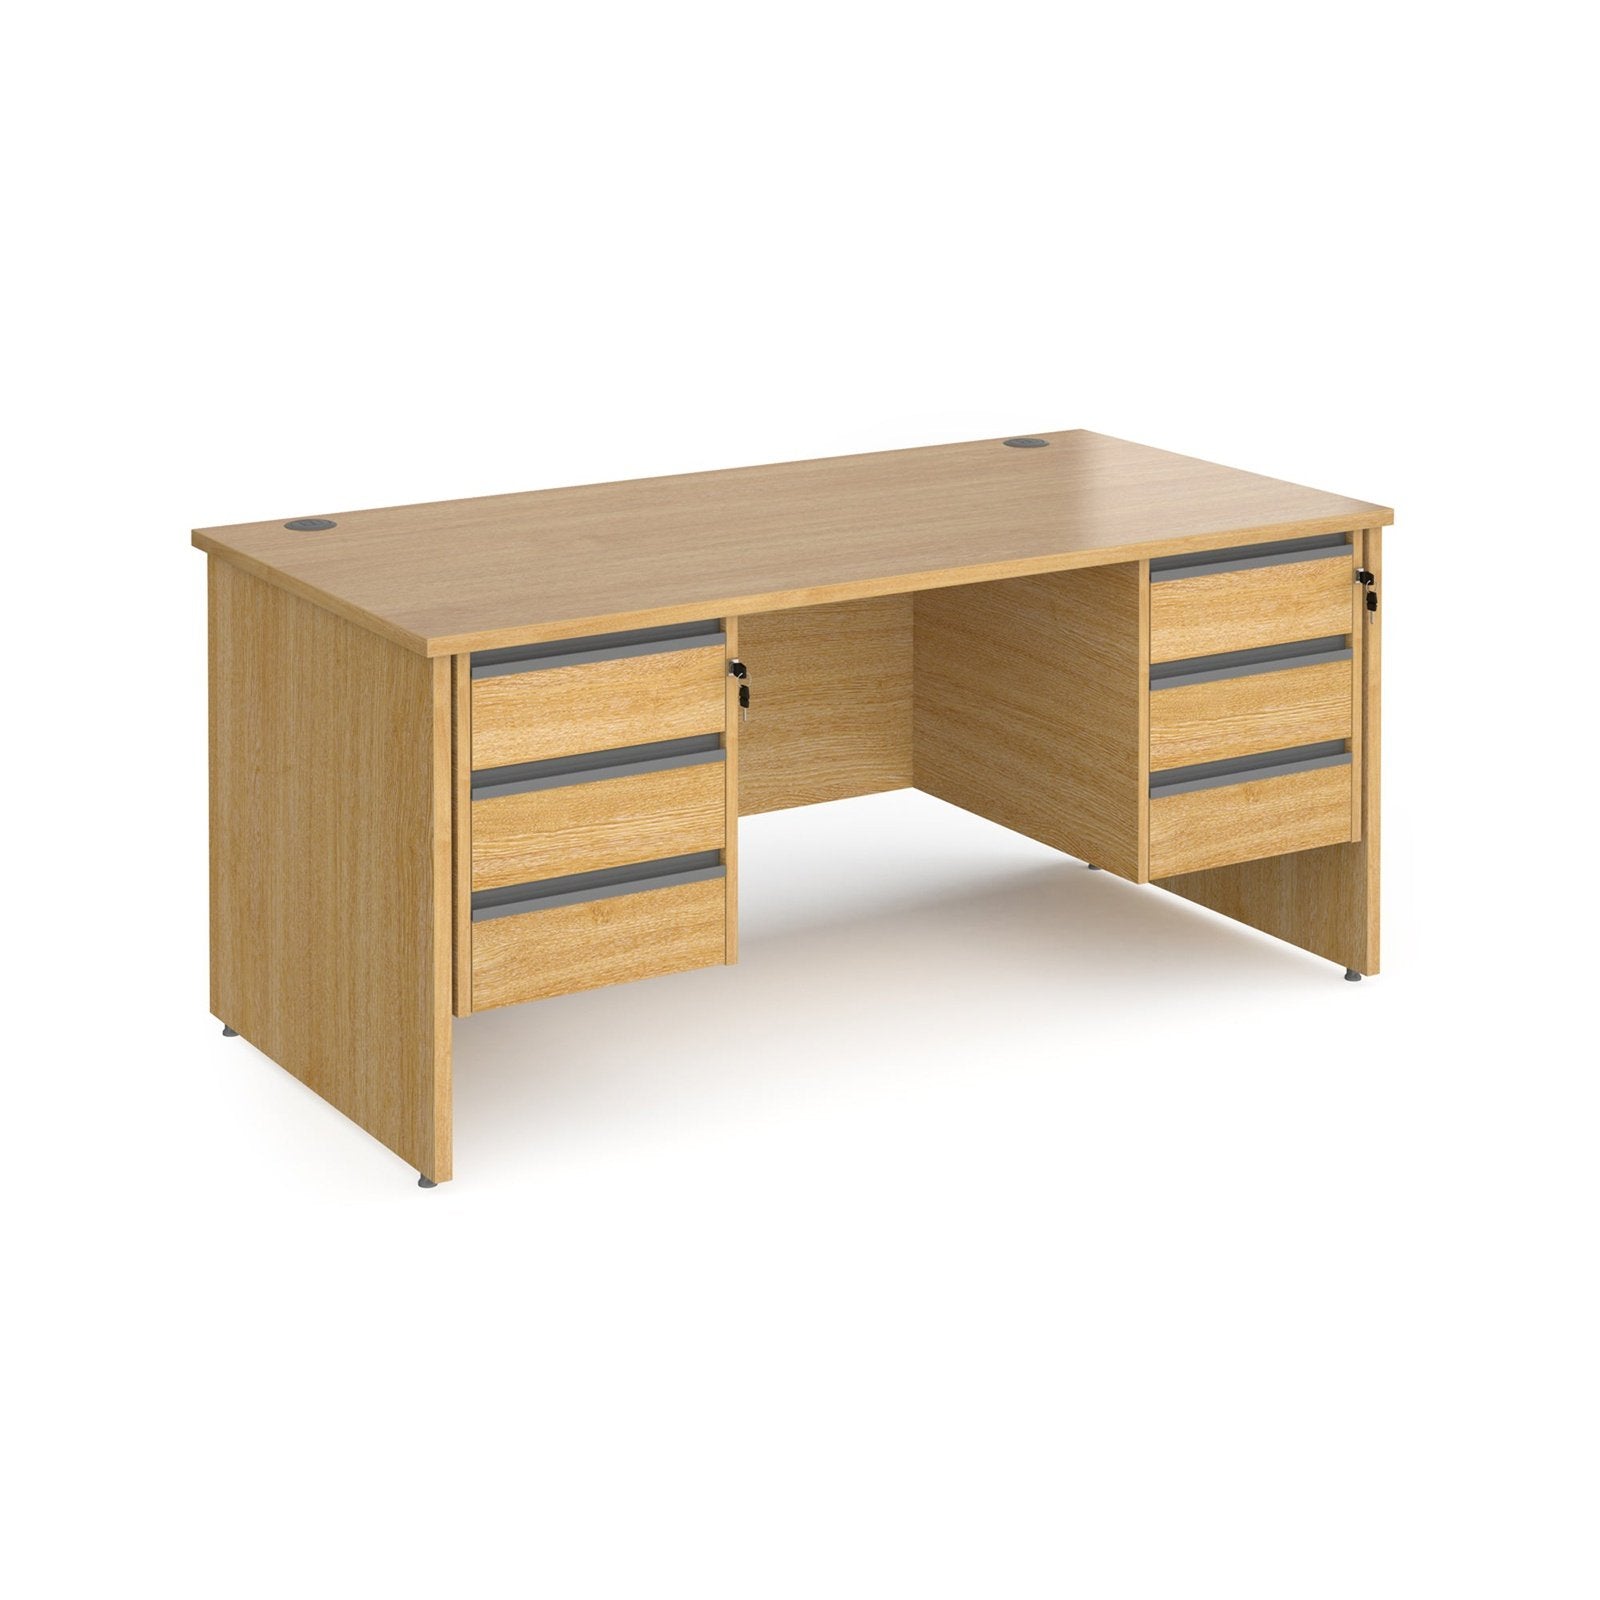 Contract 25 straight desk with 3 drawer pedestals and panel leg - Office Products Online